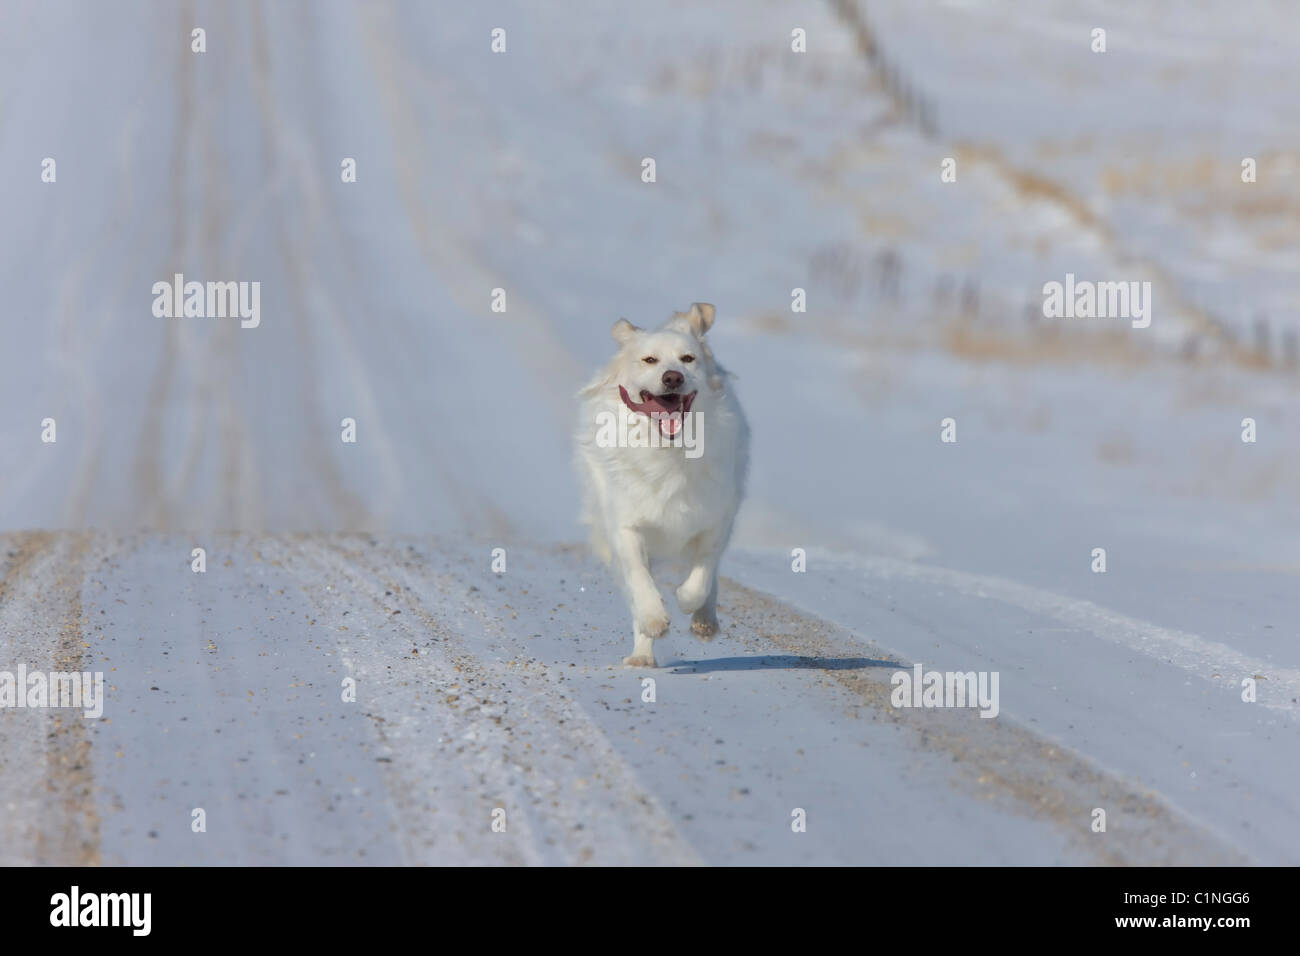 Dog Running on country road winter rural Canada Stock Photo